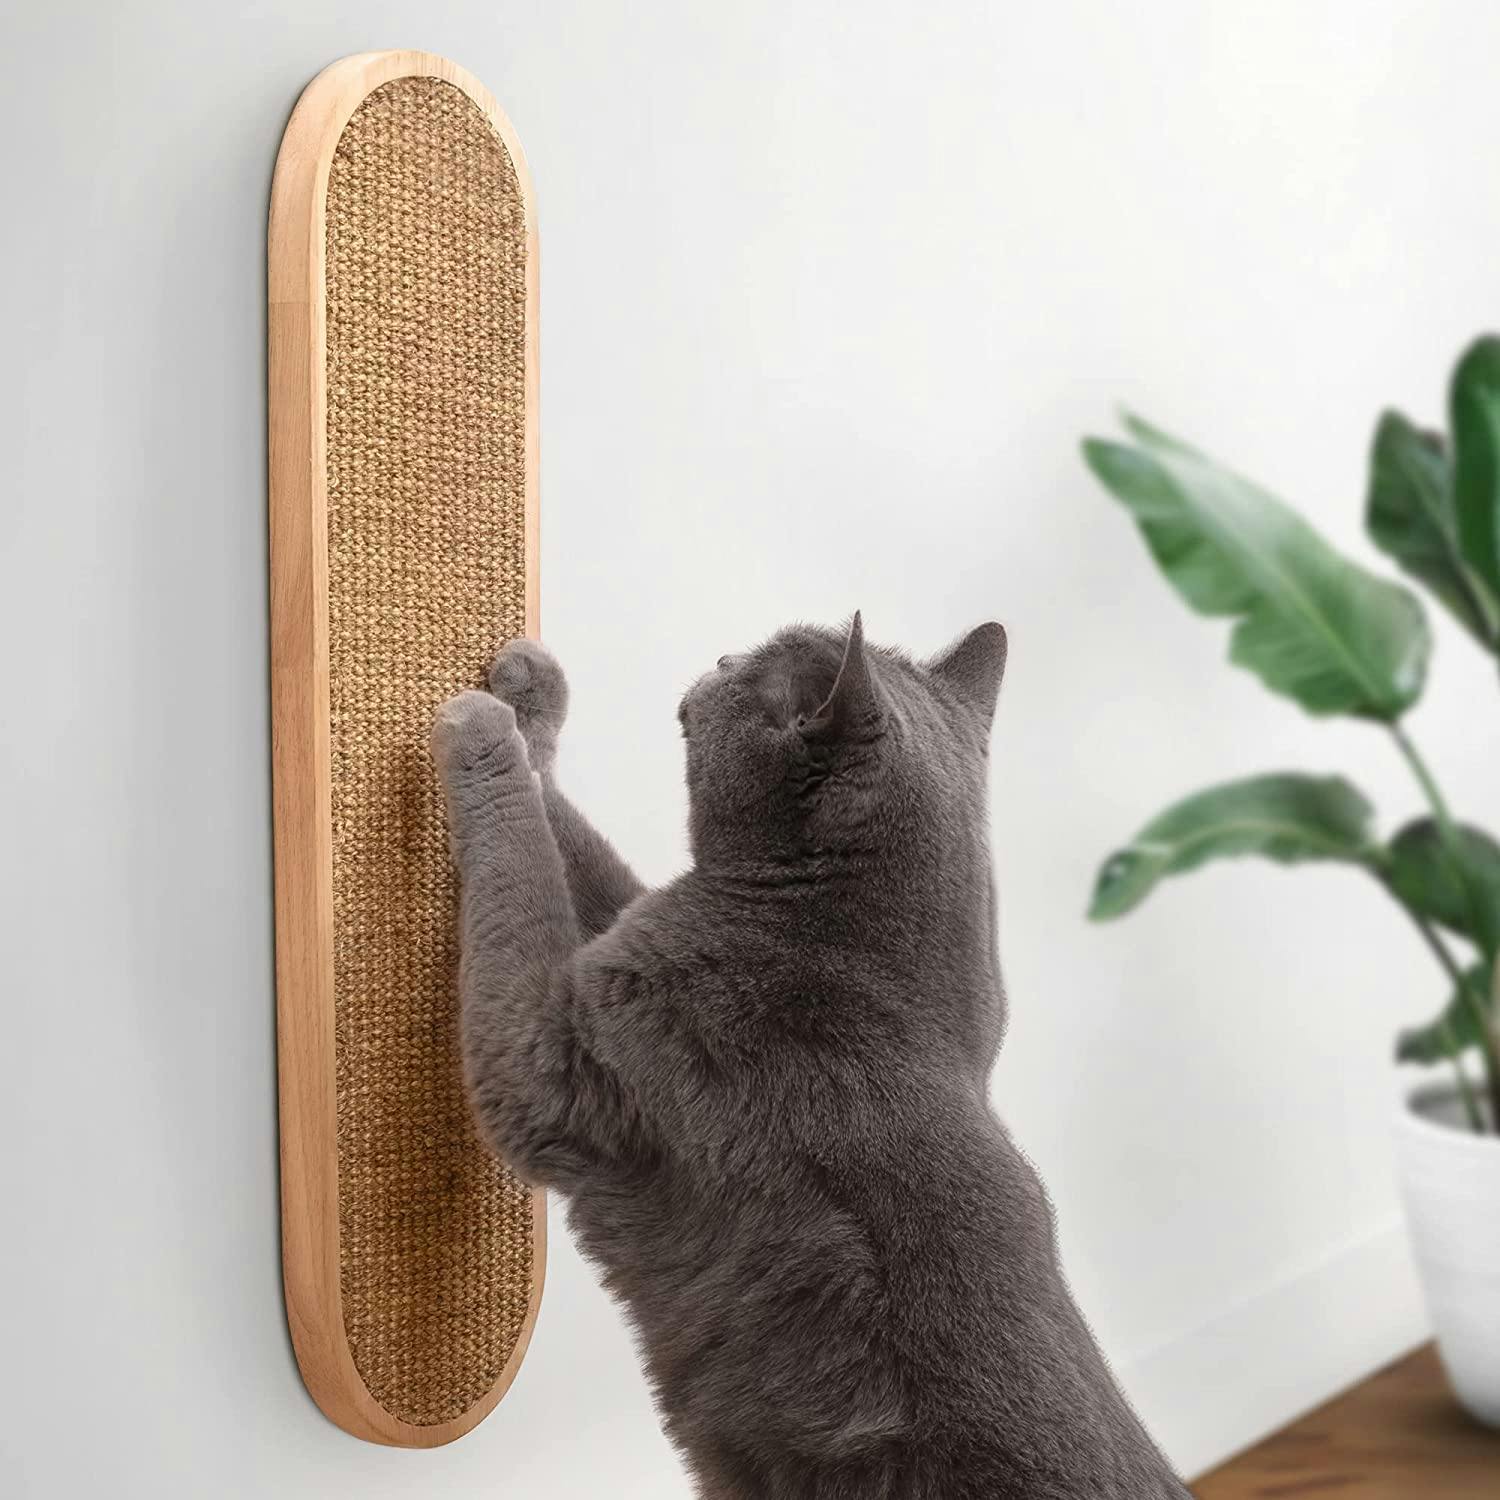 Cat using a scratch pad on the wall